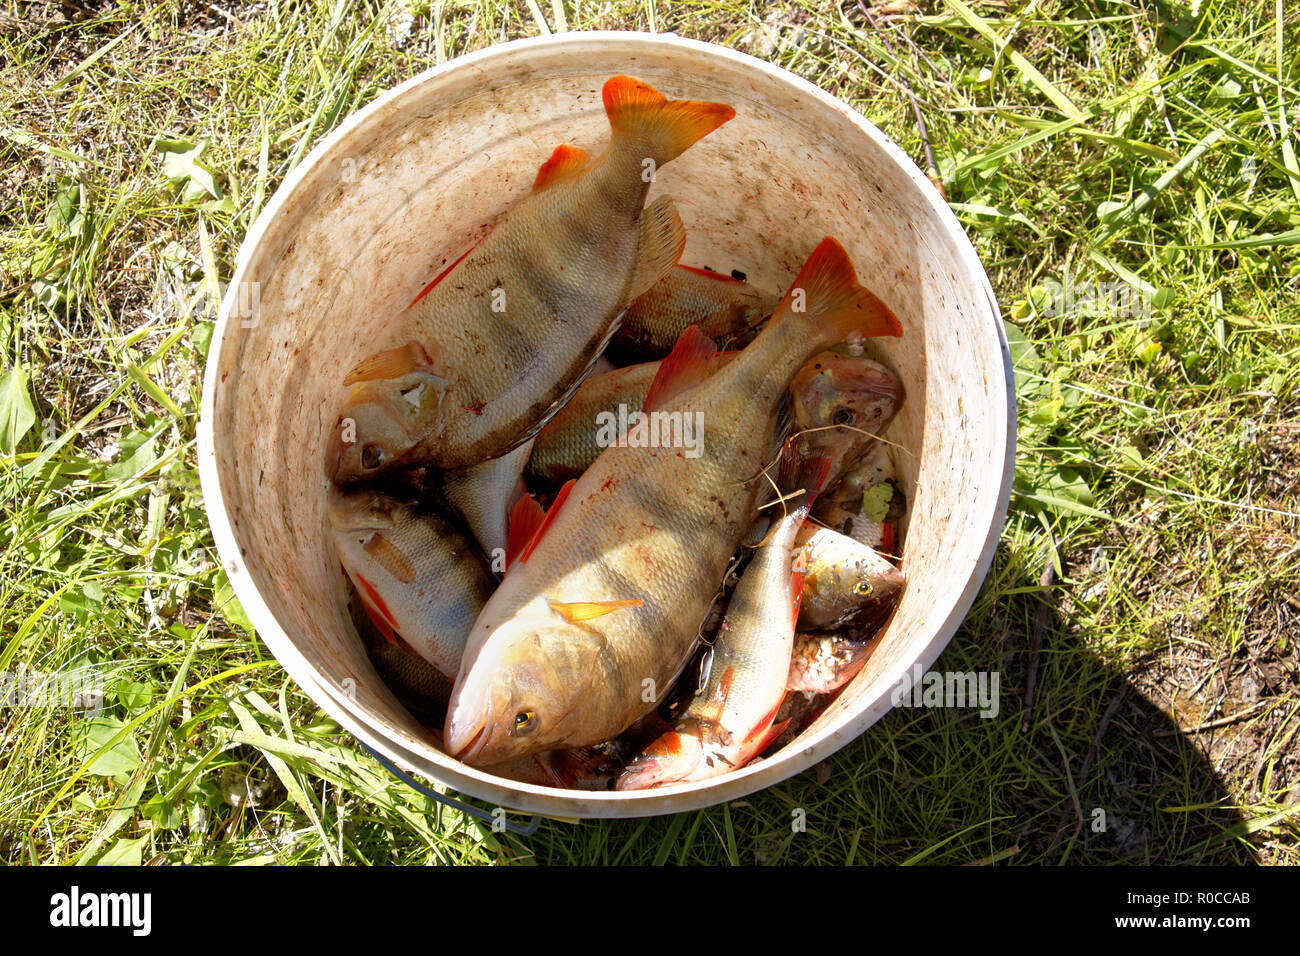 Fisherman's catch - a few large freshwater perch are in a plastic bucket  Stock Photo - Alamy